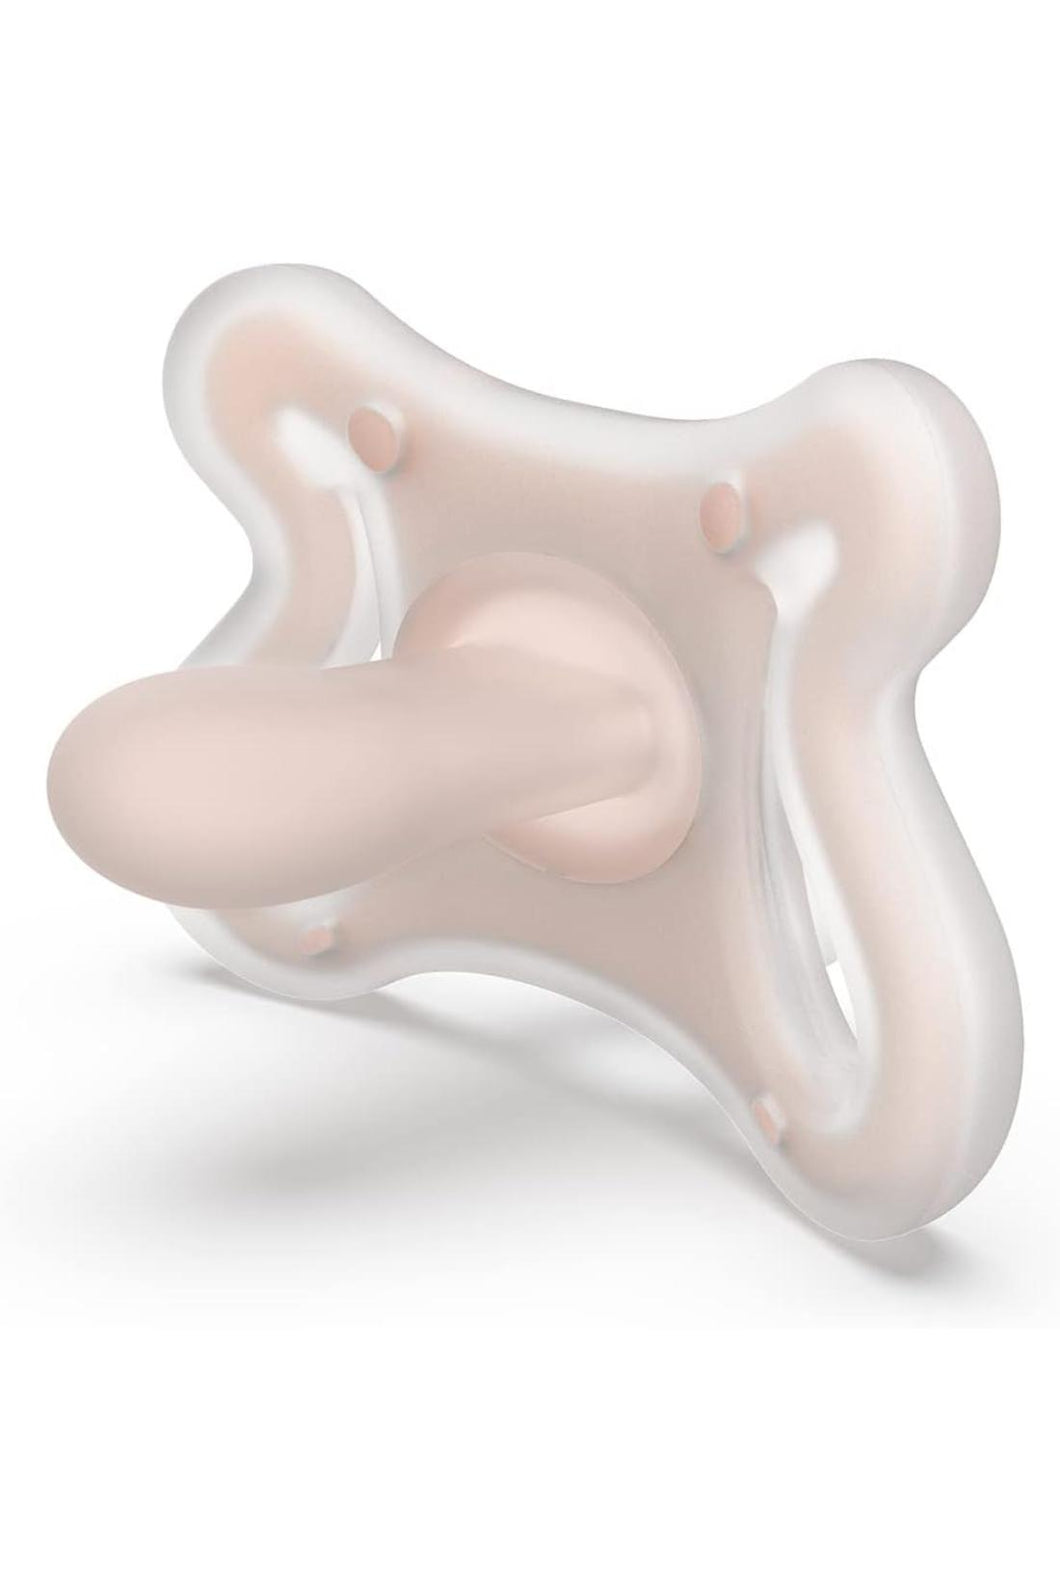 Suavinex Zero Zero Physiological Air-flow Silicone Soother 6-18M